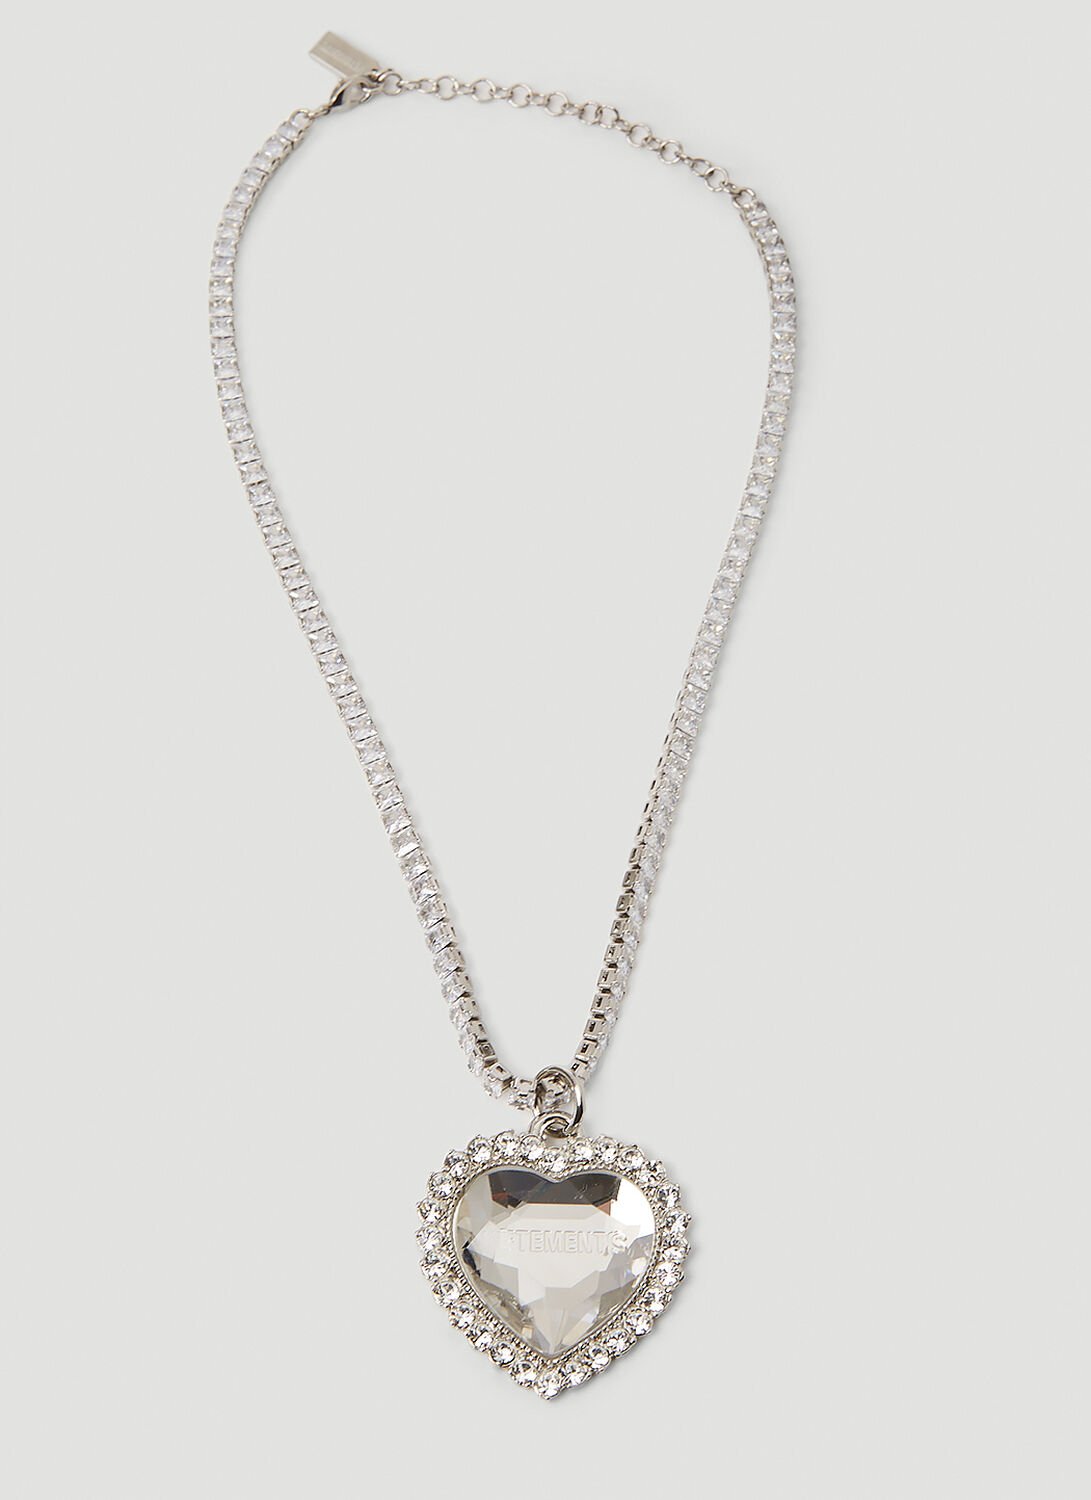 VETEMENTS CRYSTAL HEART NECKLACE